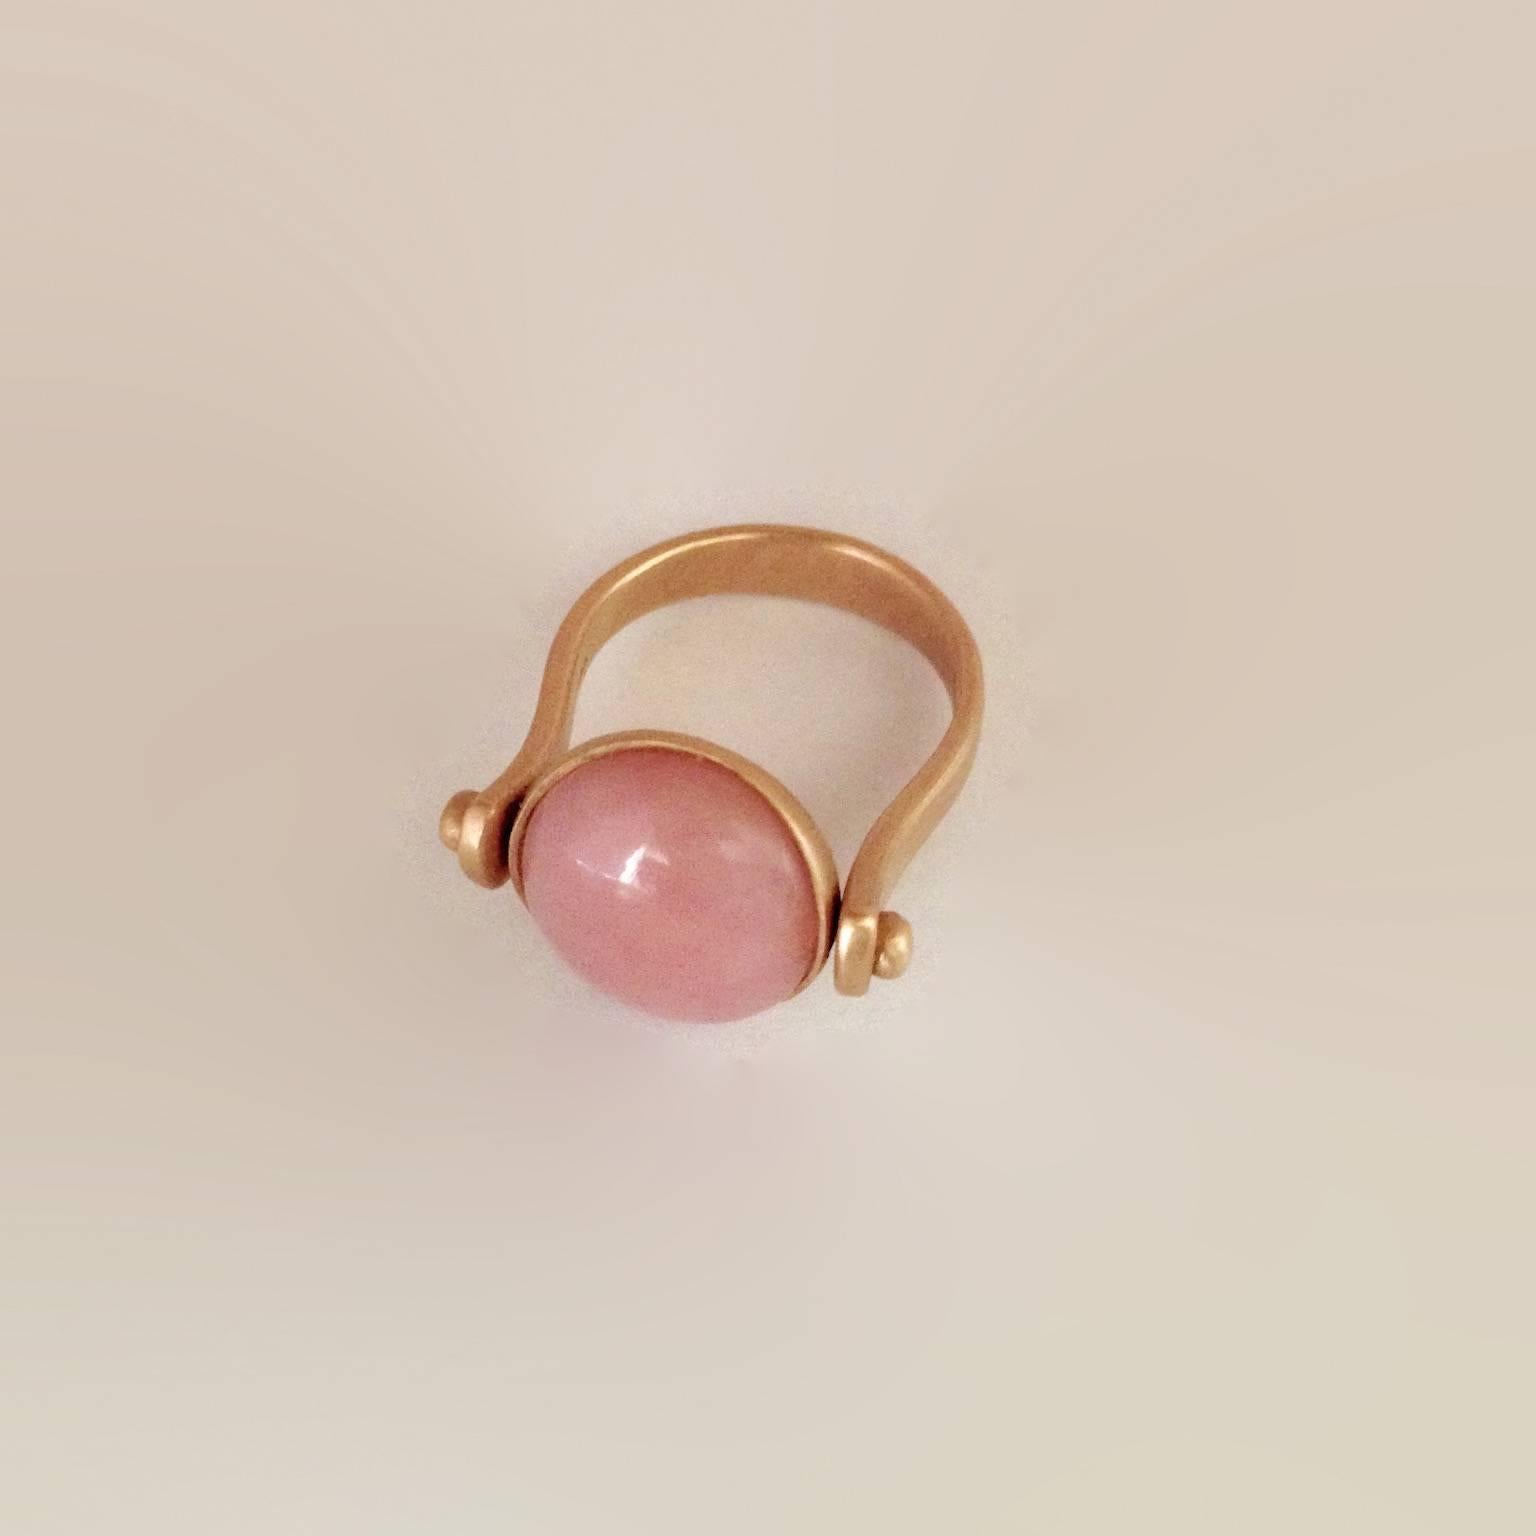 Round Cut Petronilla Roman Style Pink Opal 18kt Gold Reversible Made in Italy Ring